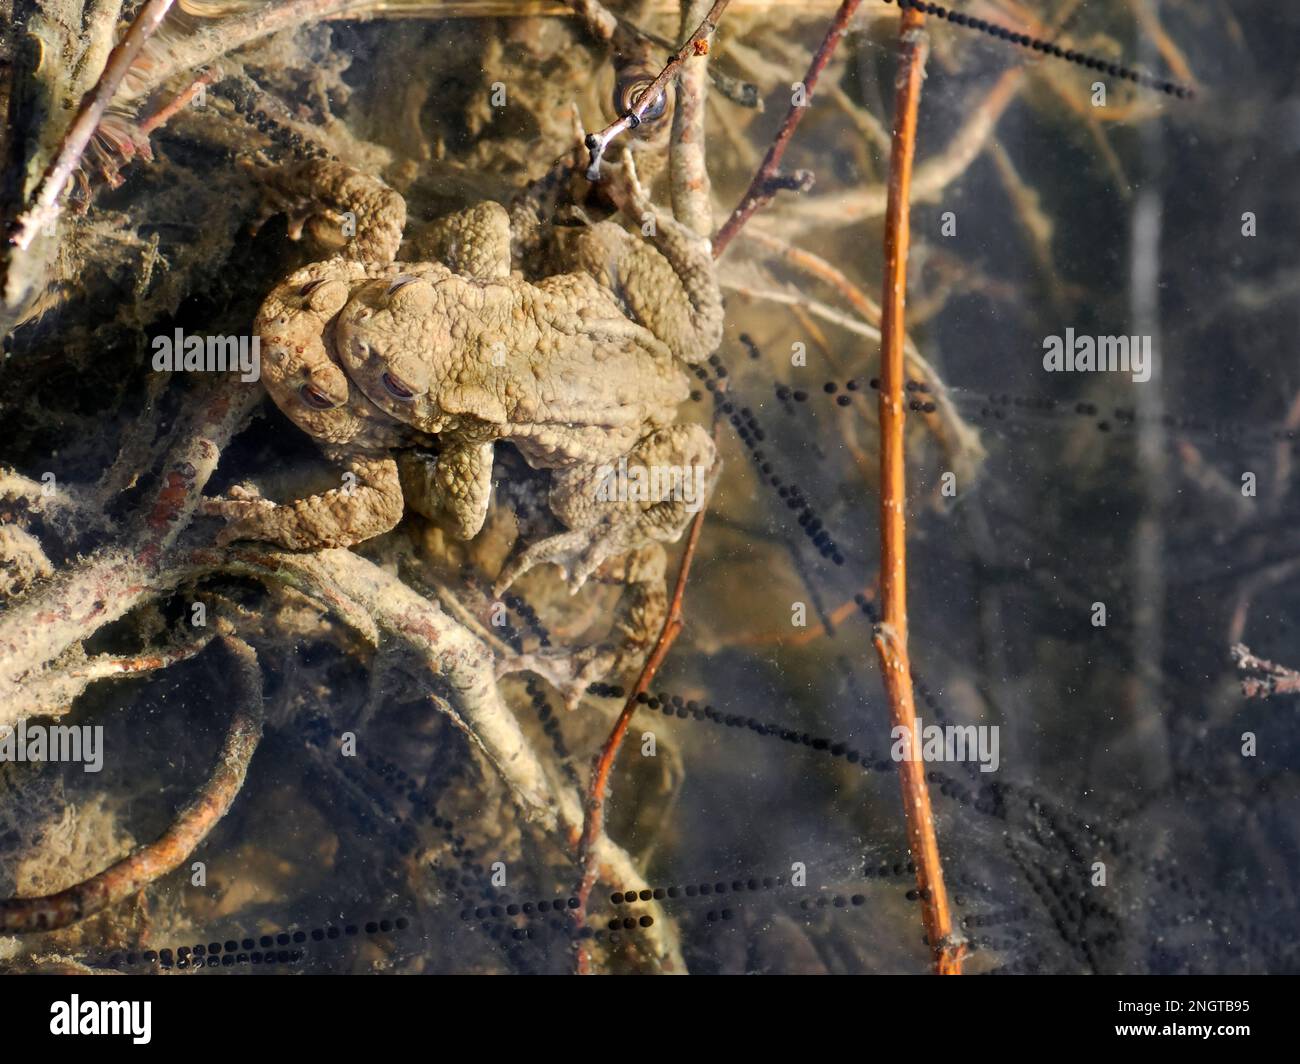 Pair of European toads (Bufo bufo) in water of pond with characteristic egg strings Stock Photo